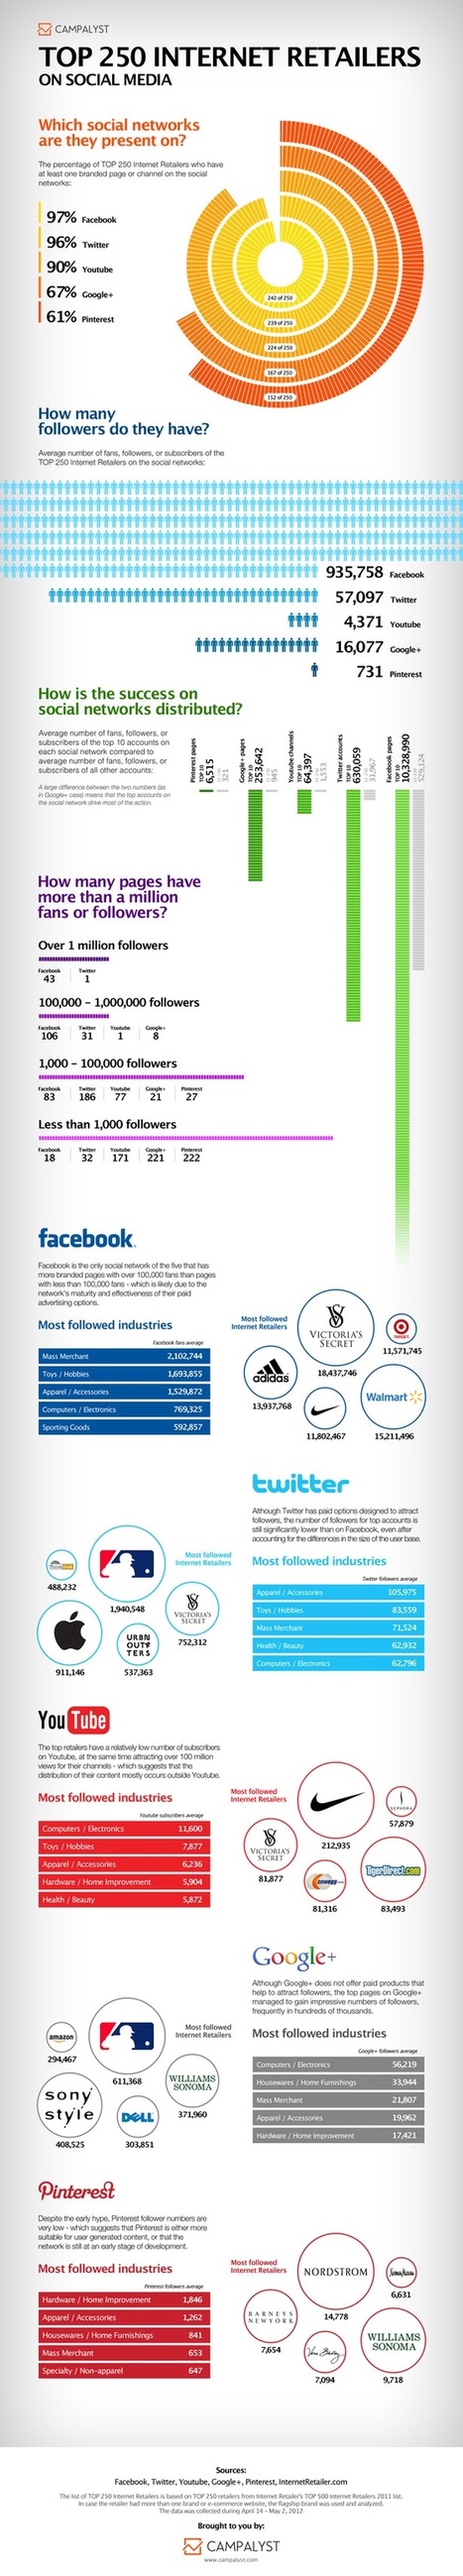 Top Social Internet Retailers [Infographic] | Latest Social Media News | Scoop.it